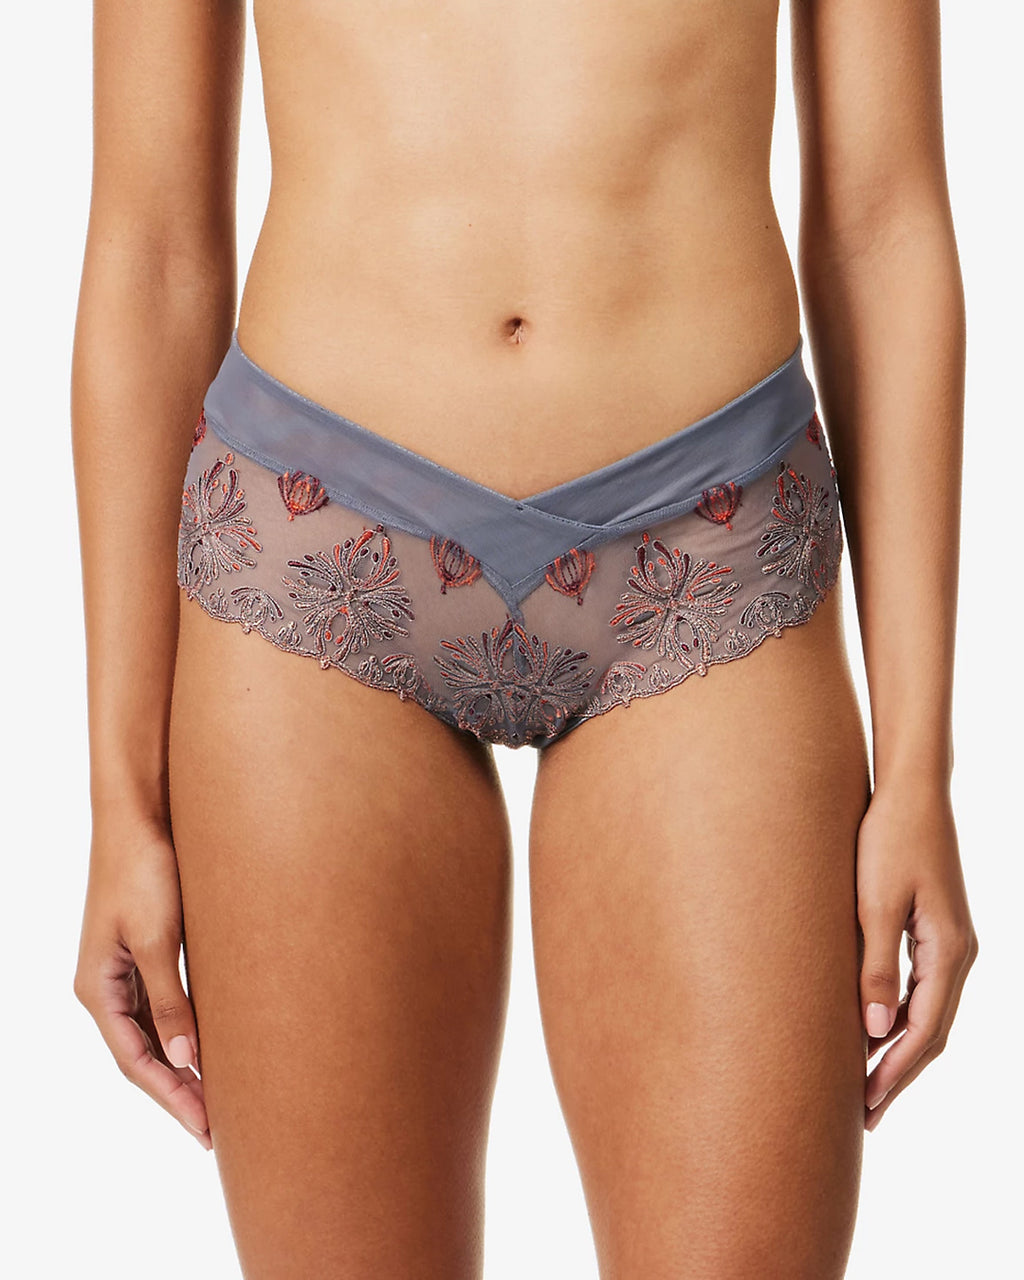 Chantelle Champs Elysees Tanga Knickers, Seabourne at John Lewis & Partners